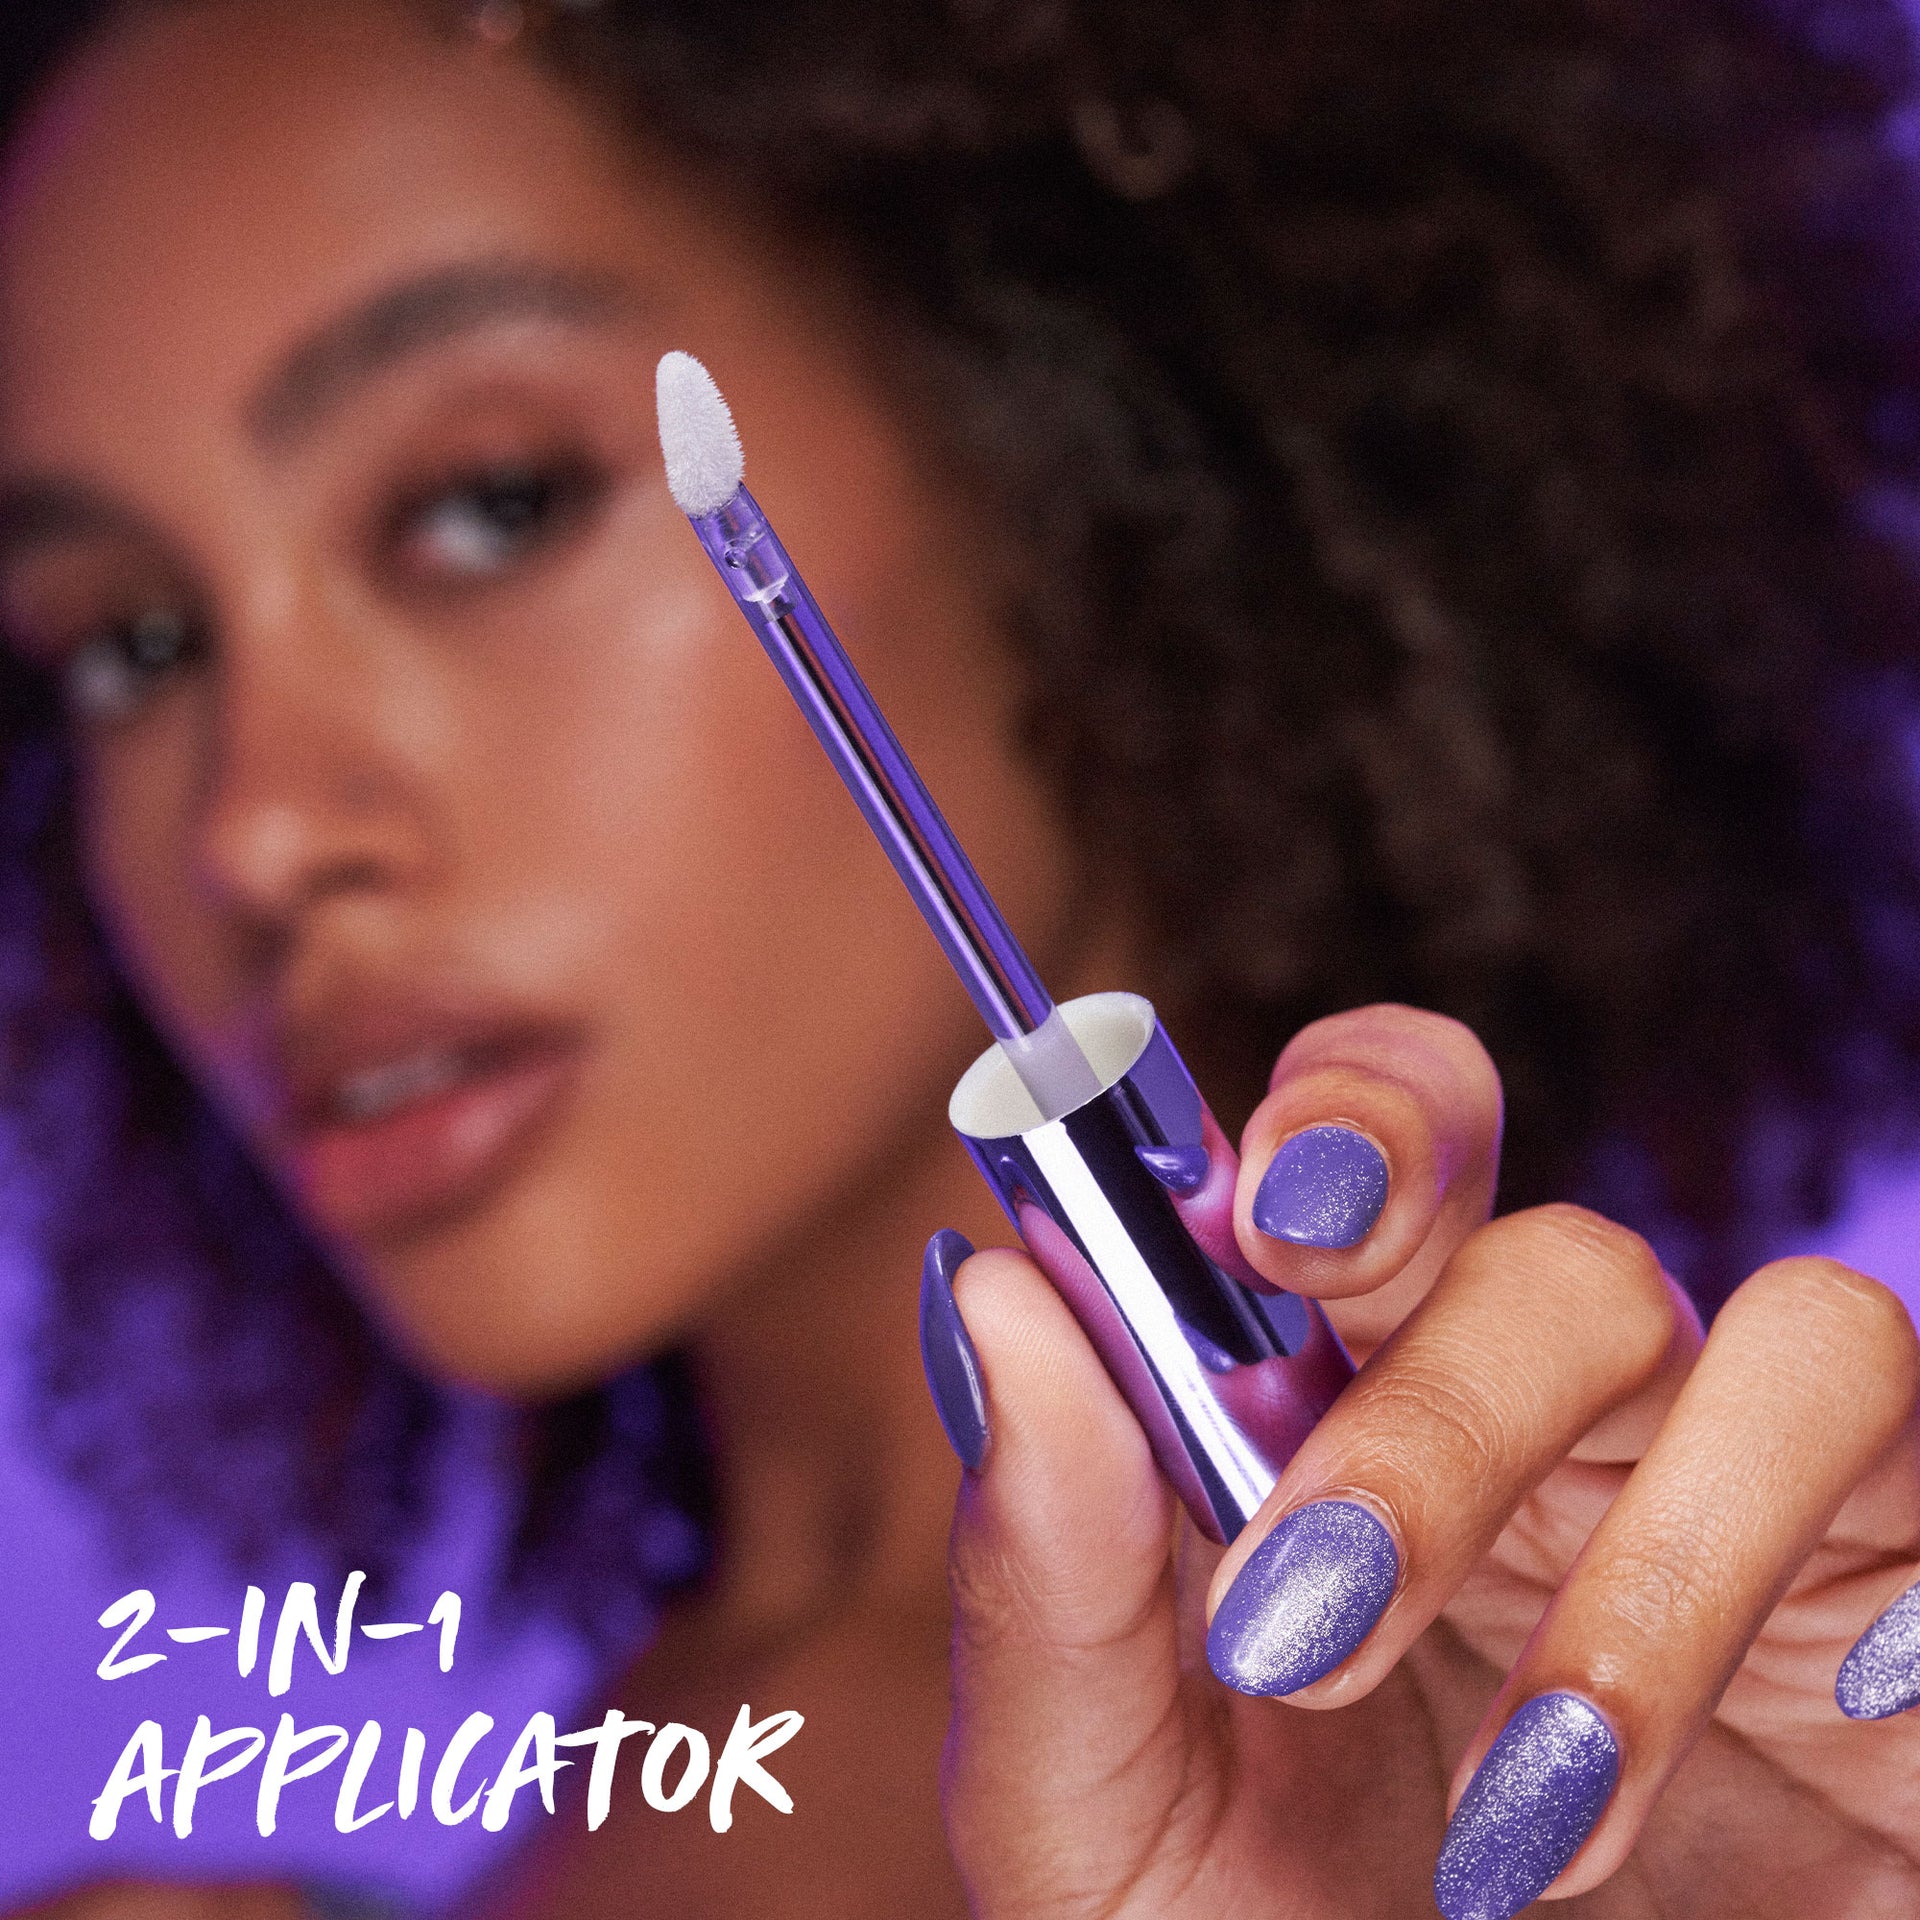 Grow Potion 2 in 1 Applicator